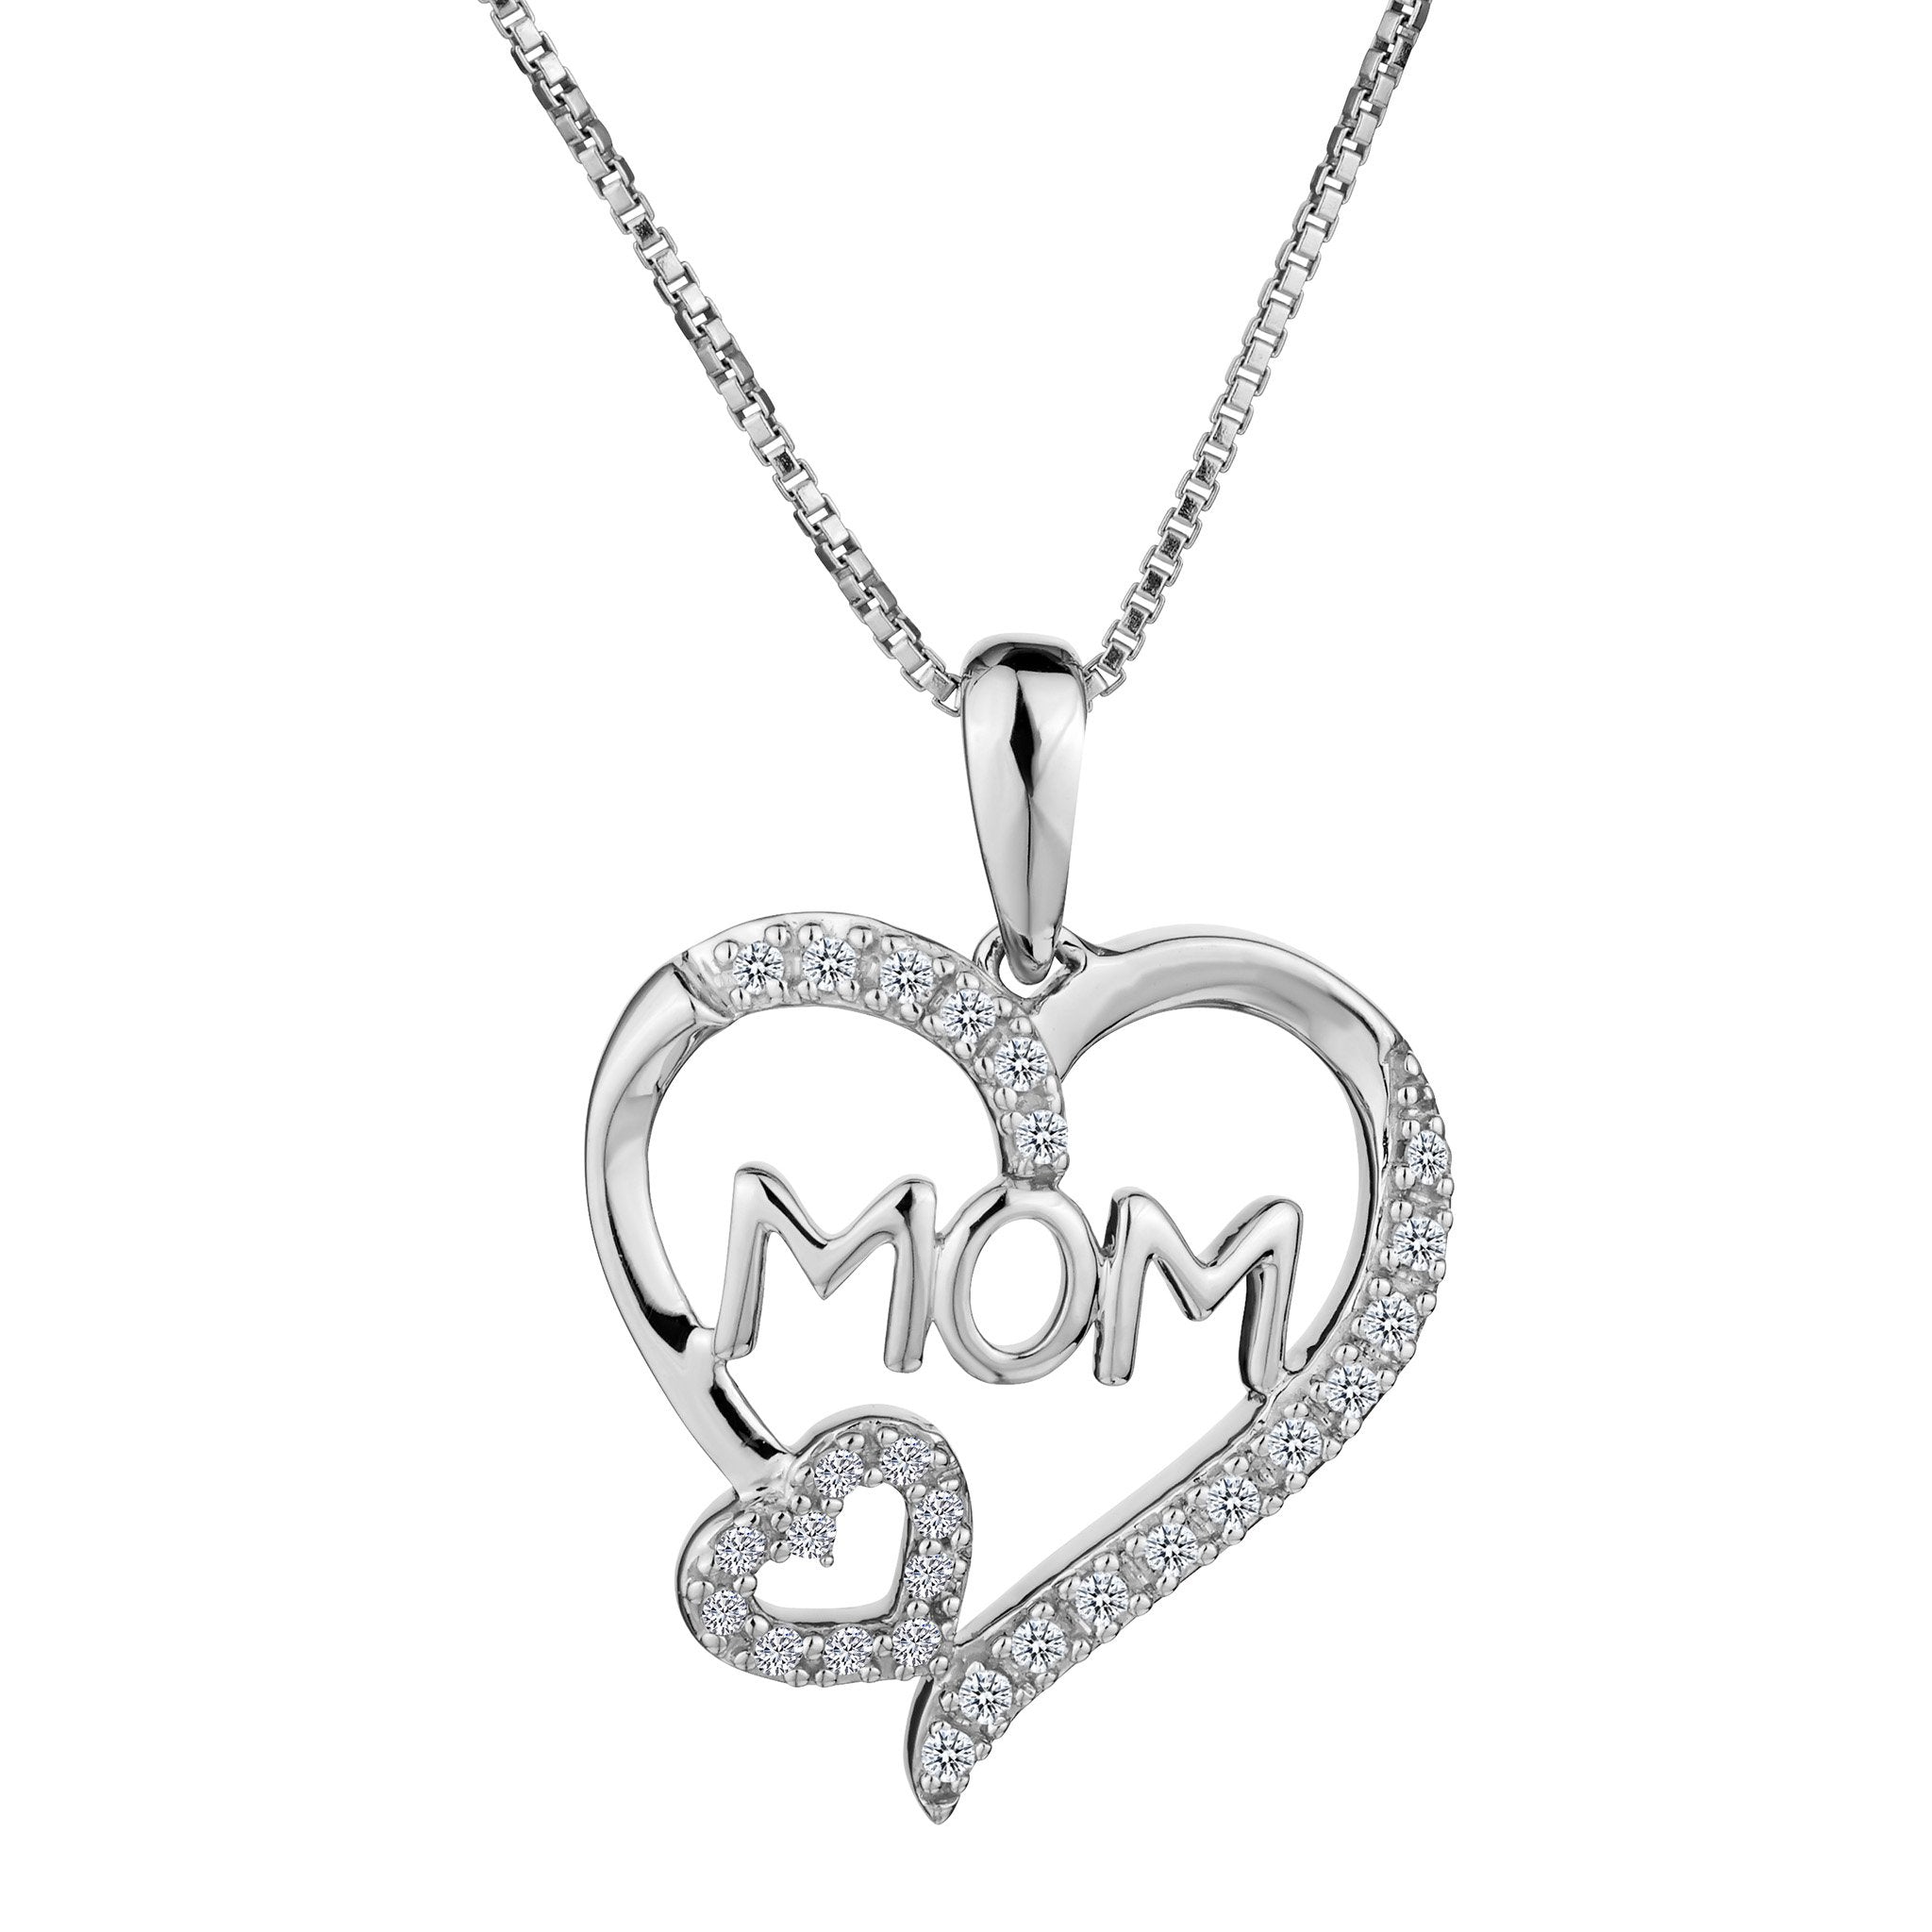 .12 Carat "Mom" Heart Diamond Pendant,  Sterling Silver. Necklaces and Pendants. Griffin Jewellery Designs.